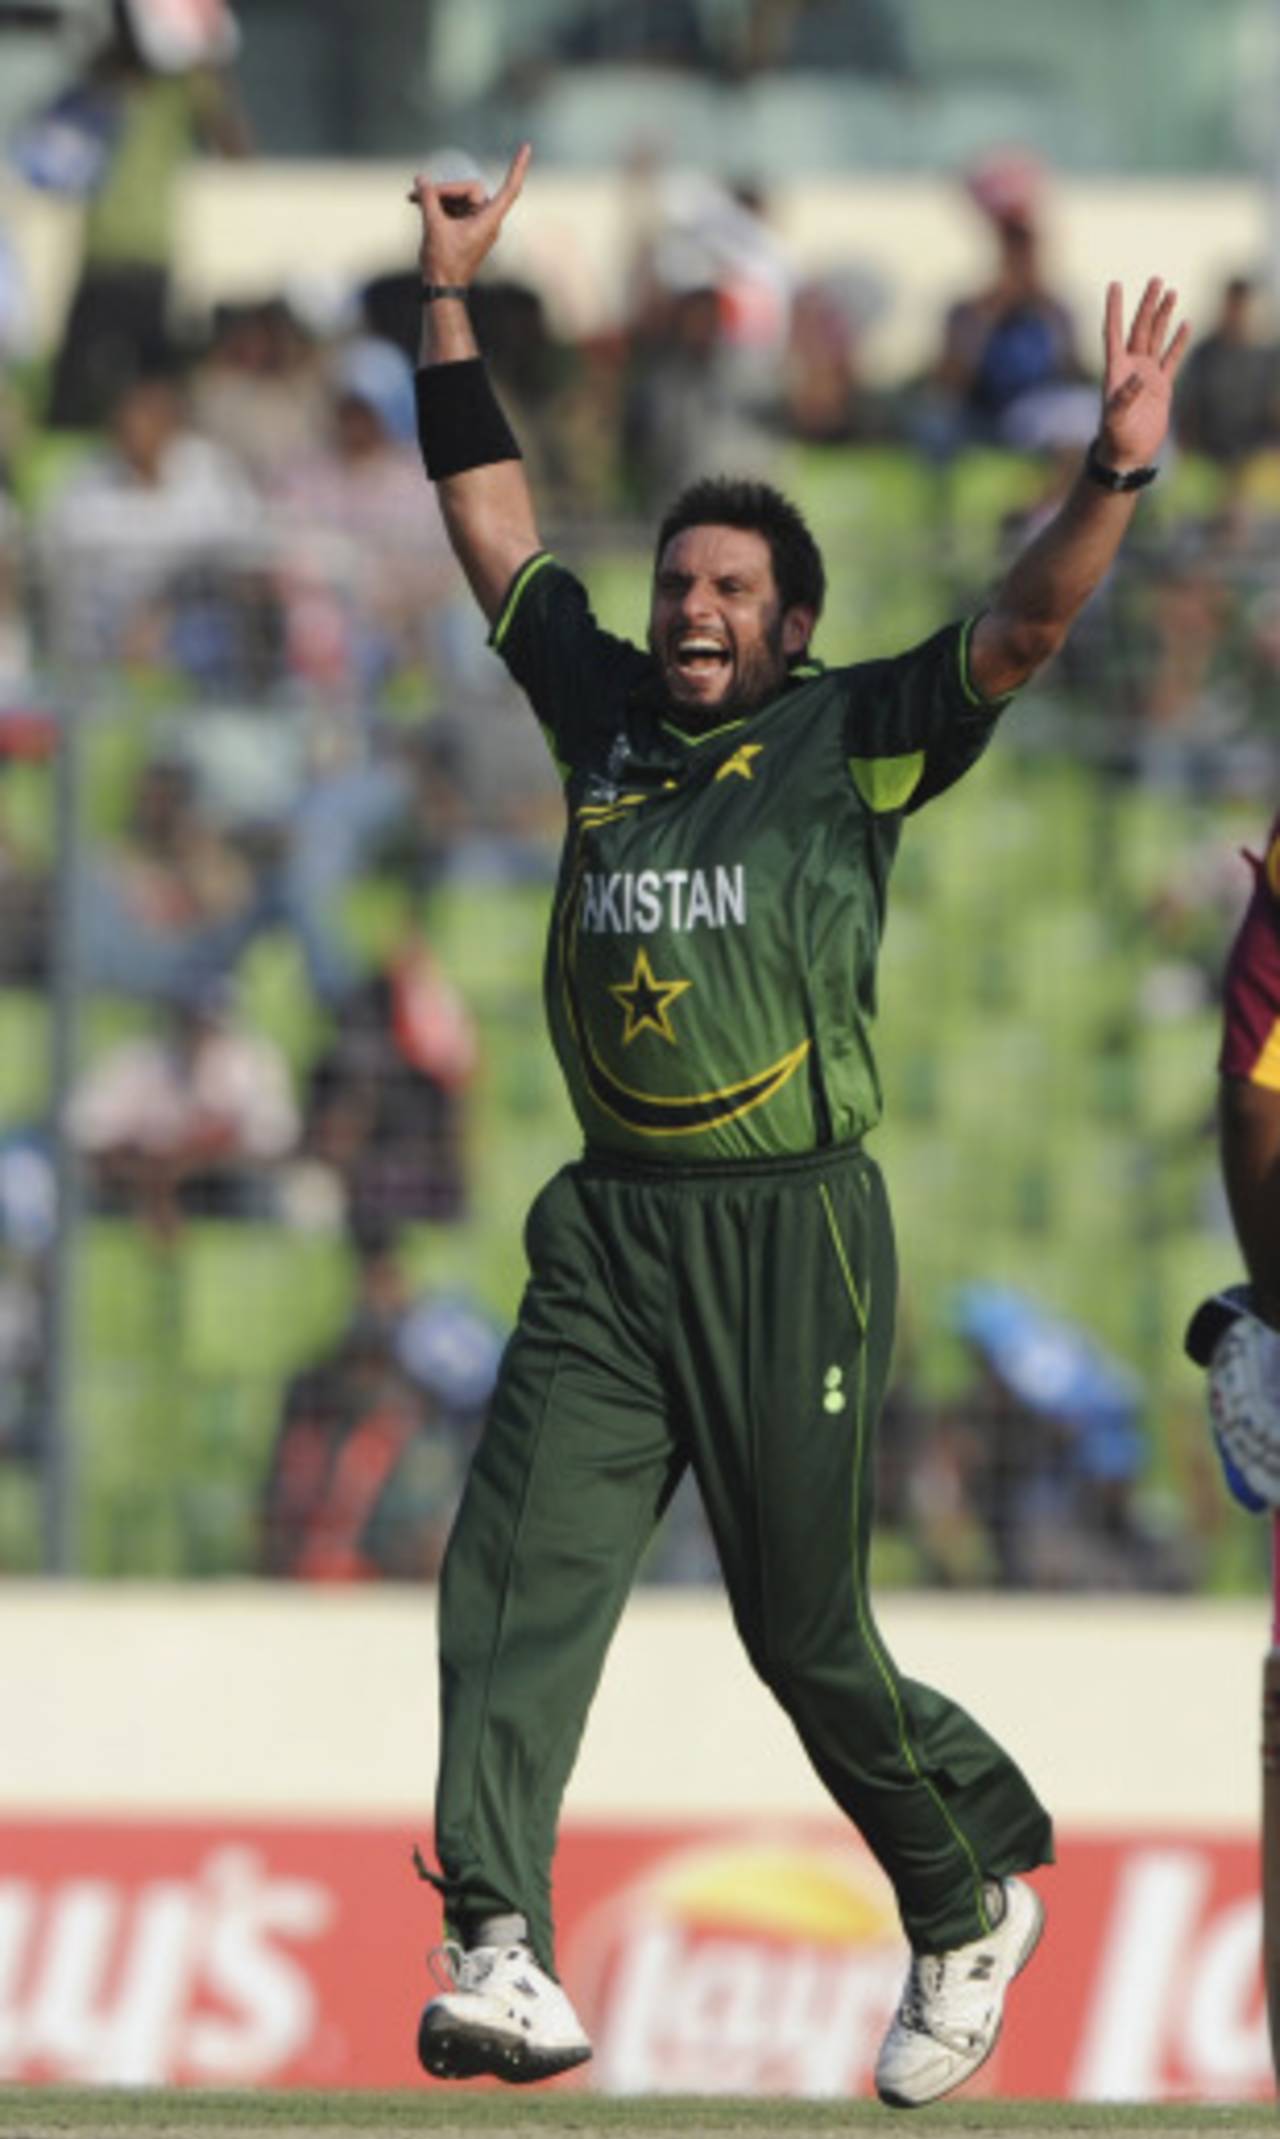 Shahid Afridi trapped Devon Thomas lbw for a golden duck, West Indies v Pakistan, 1st quarter-final, World Cup 2011, March 23, 2011